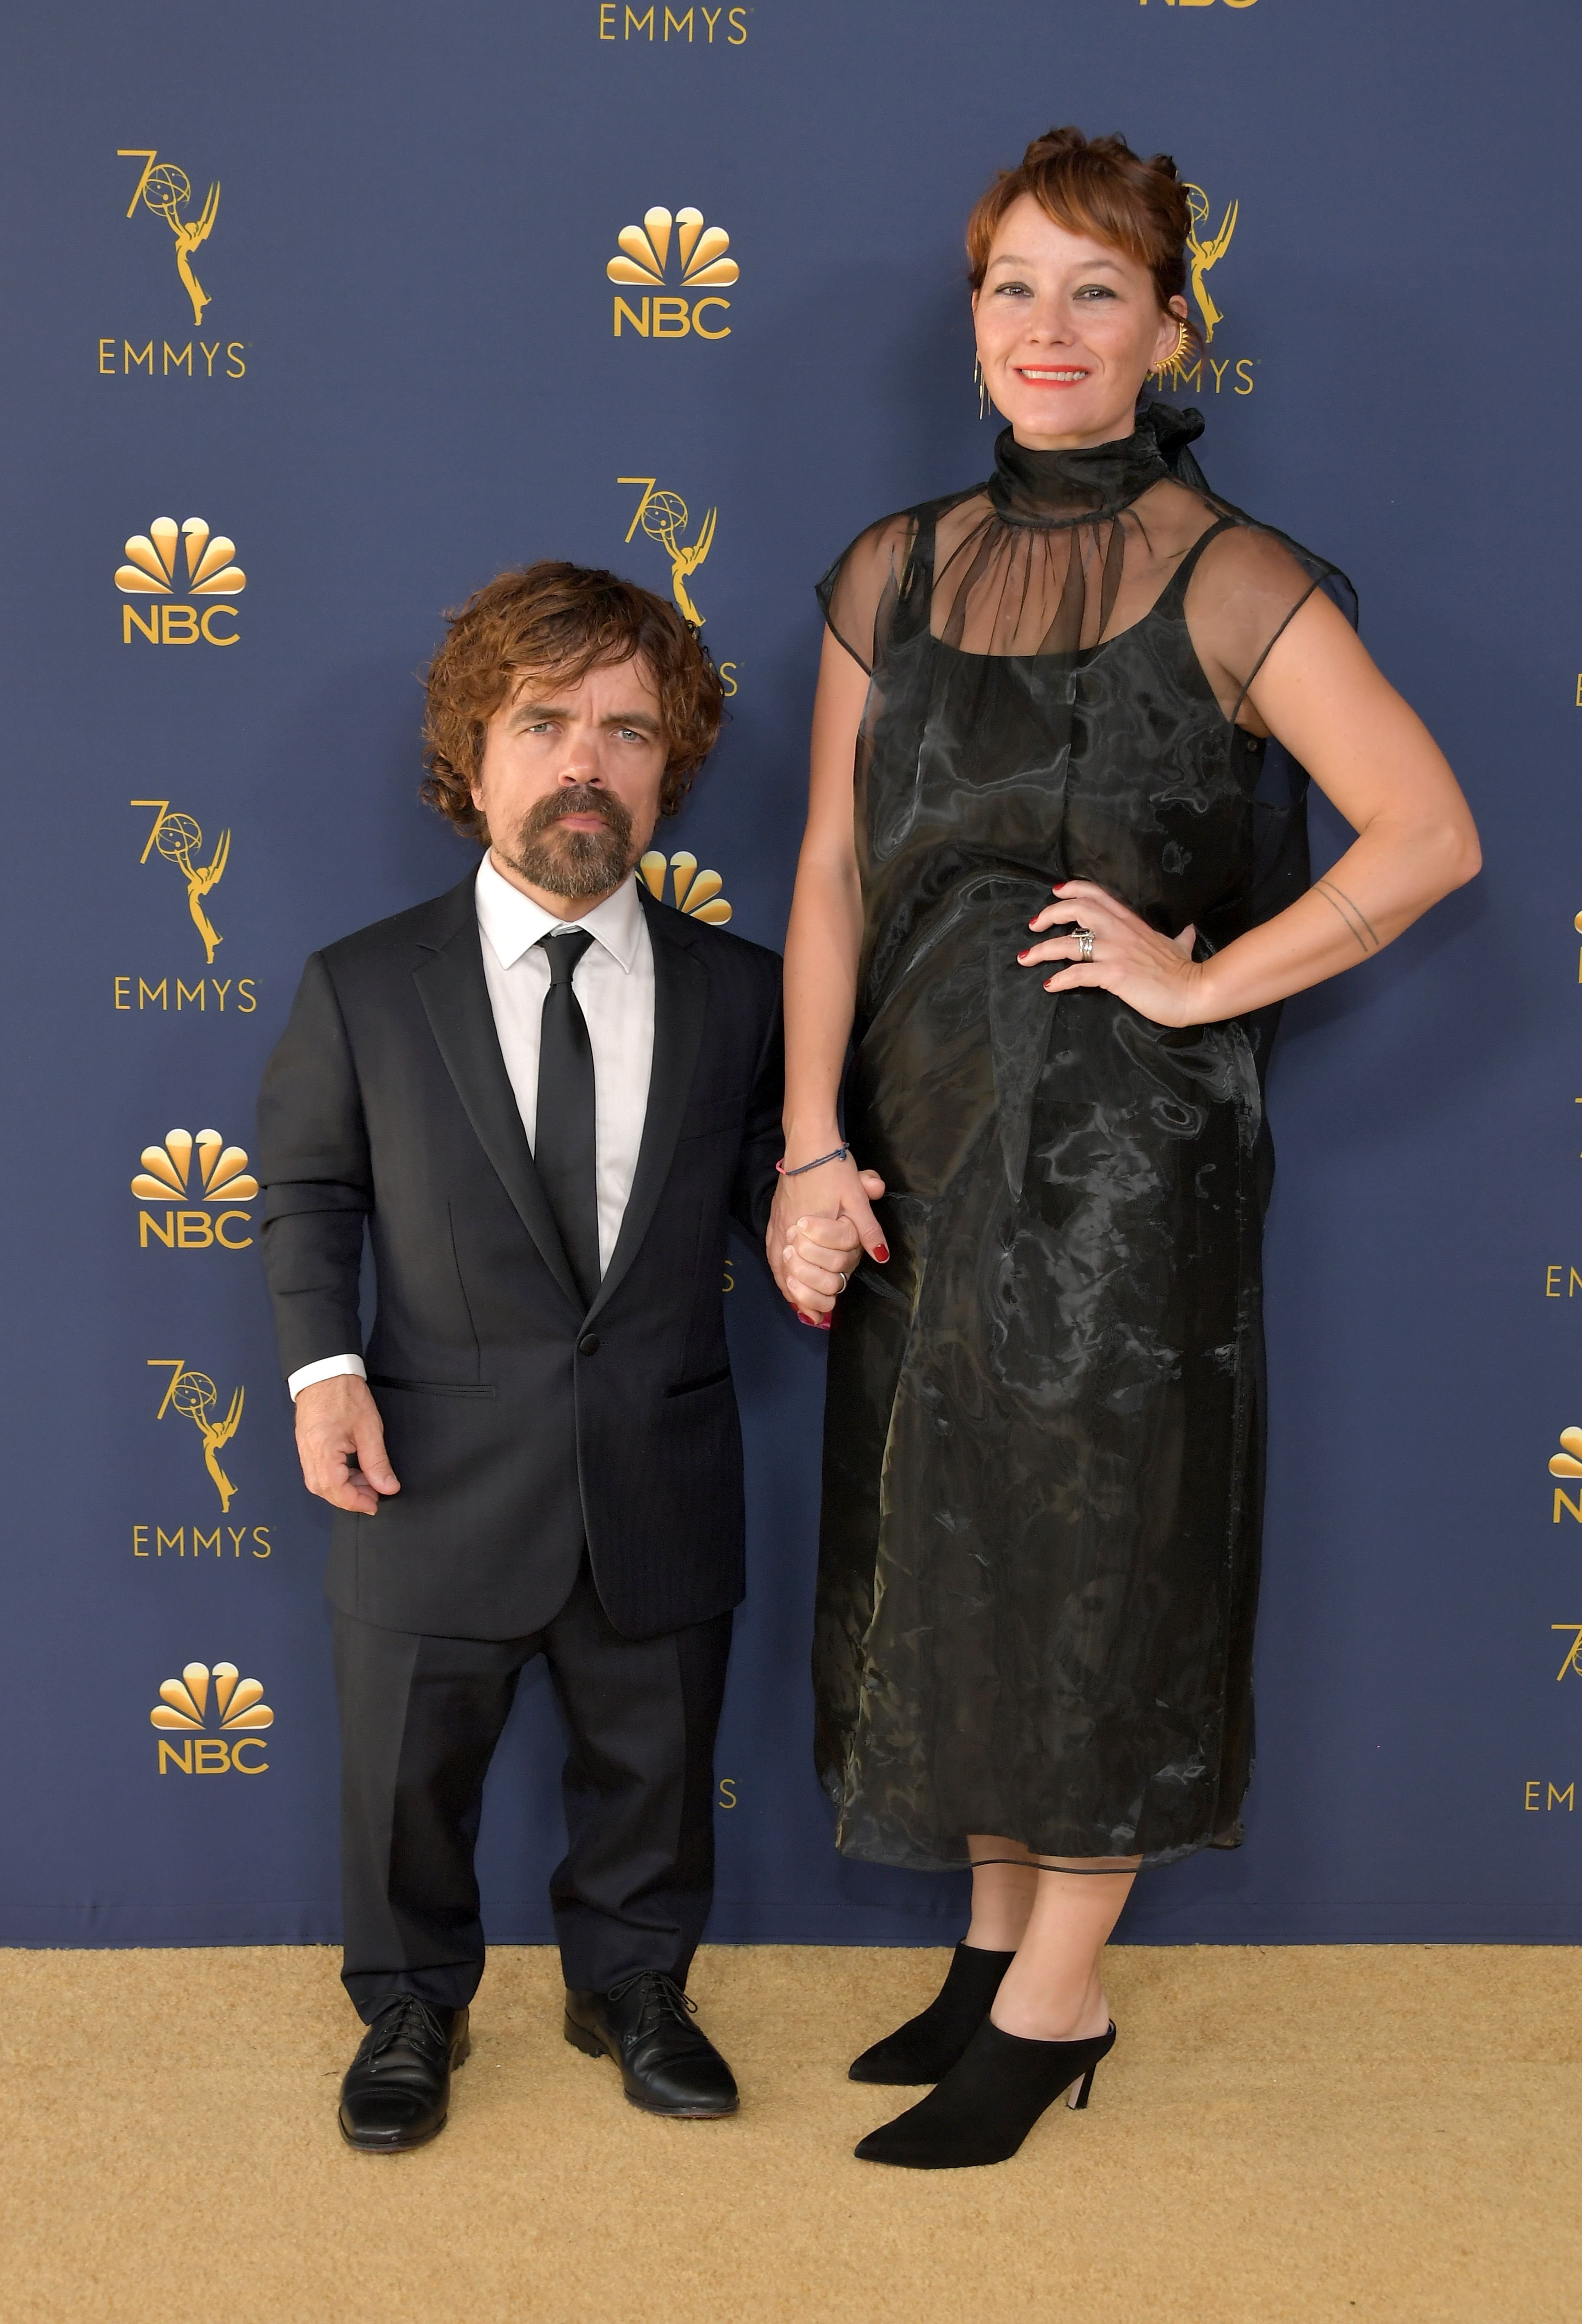 Peter Dinklage and Erica Schmidt at the 70th Emmy Awards in 2018 in Los Angeles, California | Source: Getty Images